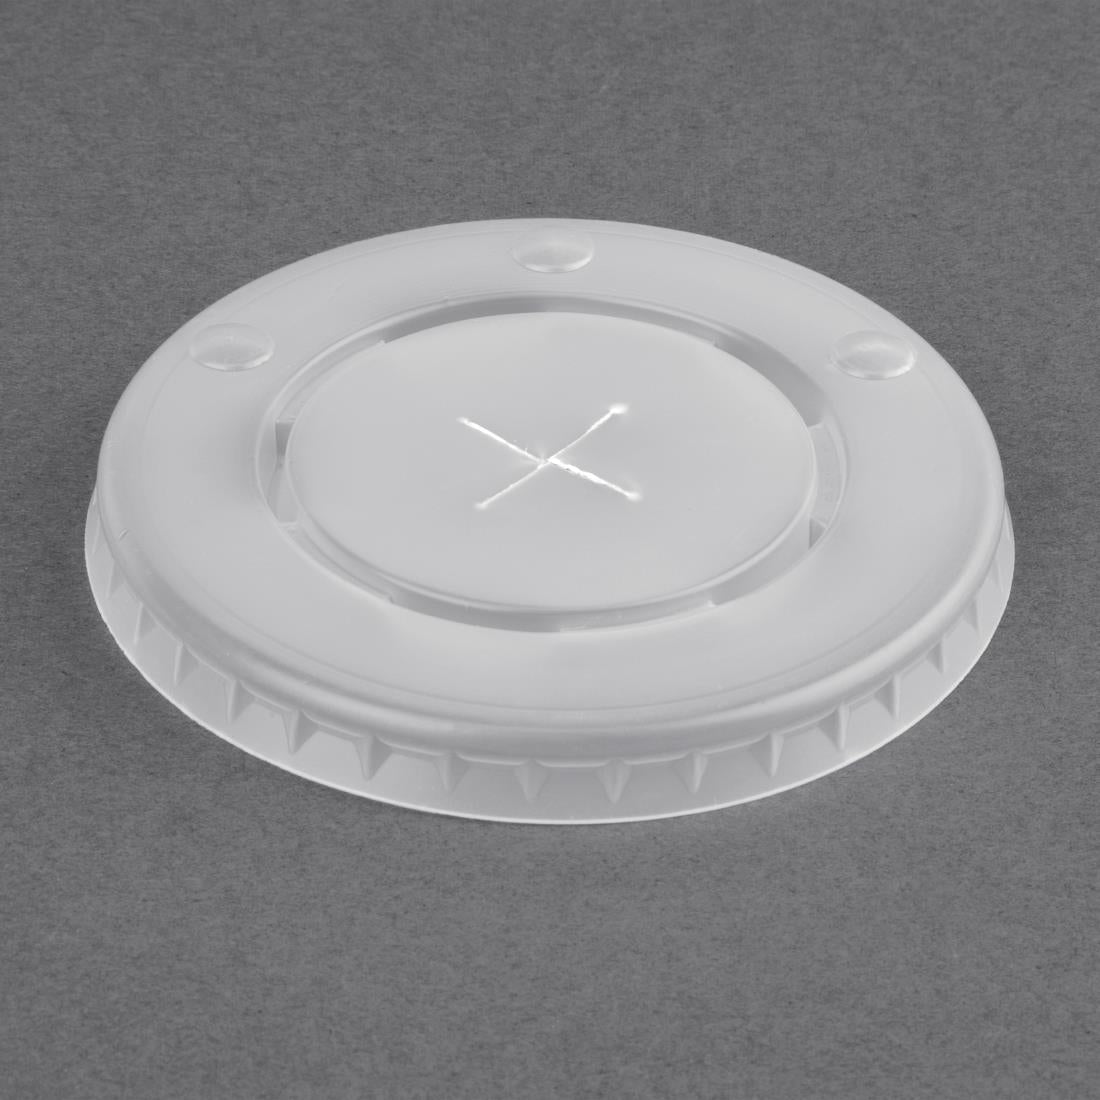 FP783 Fiesta Recyclable Polystyrene Lids for 12oz Cold Paper Cups 80mm (Pack of 1000) JD Catering Equipment Solutions Ltd